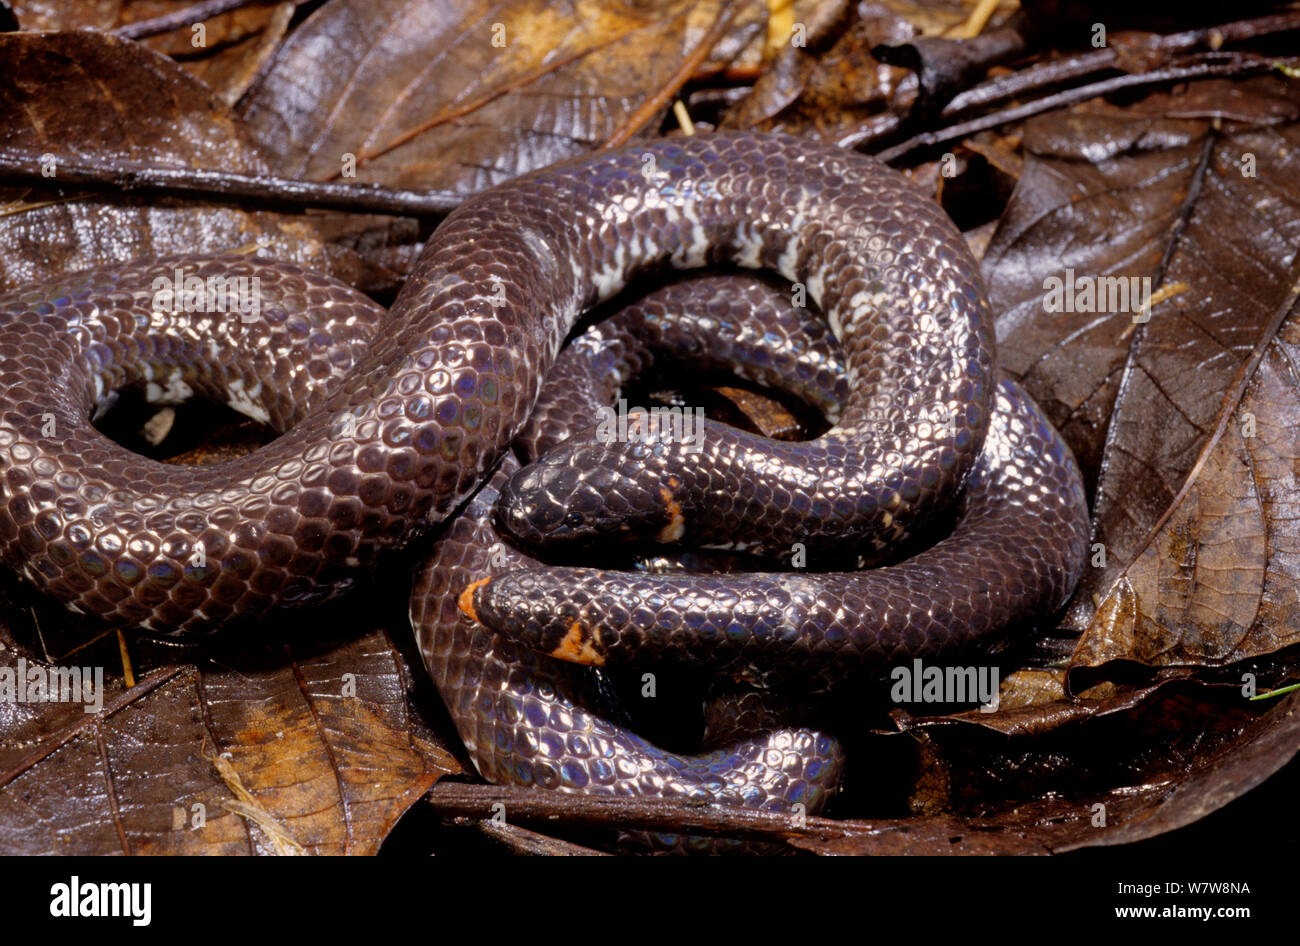 https://c8.alamy.com/comp/W7W8NA/red-tailed-pipe-snake-cylindrophis-ruffus-in-defensive-posture-south-east-asia-W7W8NA.jpg